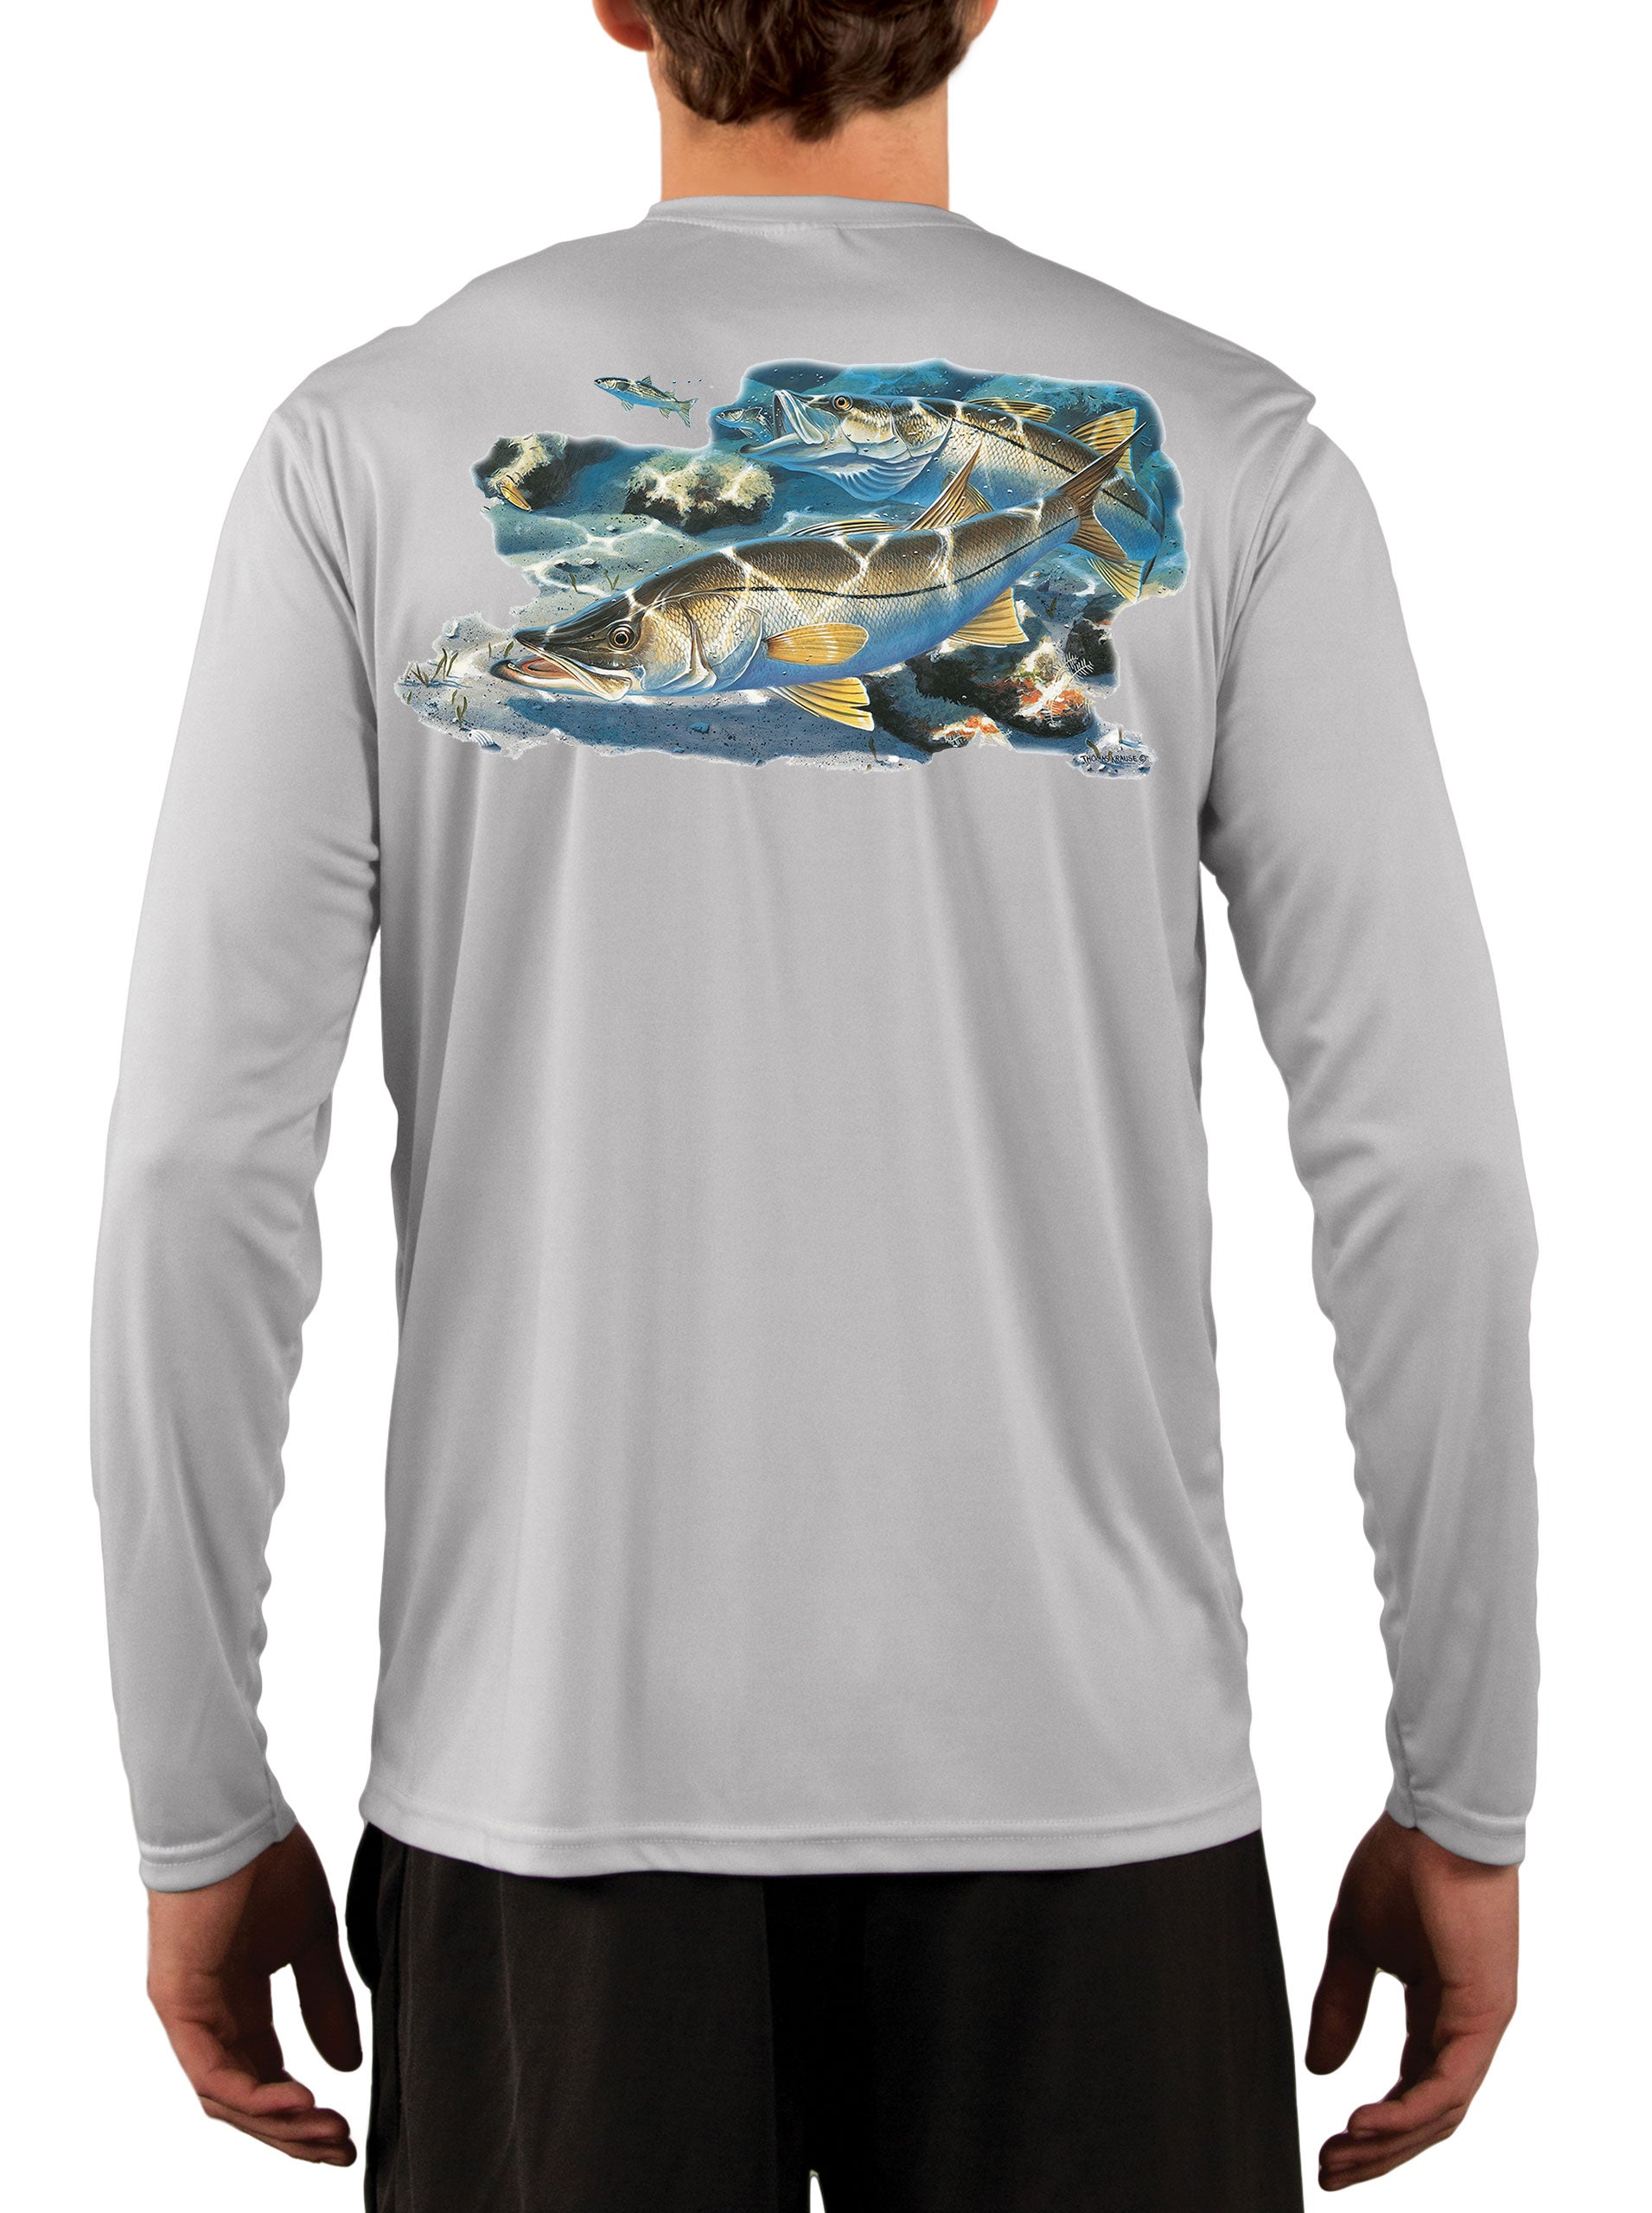 Snook Fishing Shirt Along the Jetty with Optional Sleeve: Florida